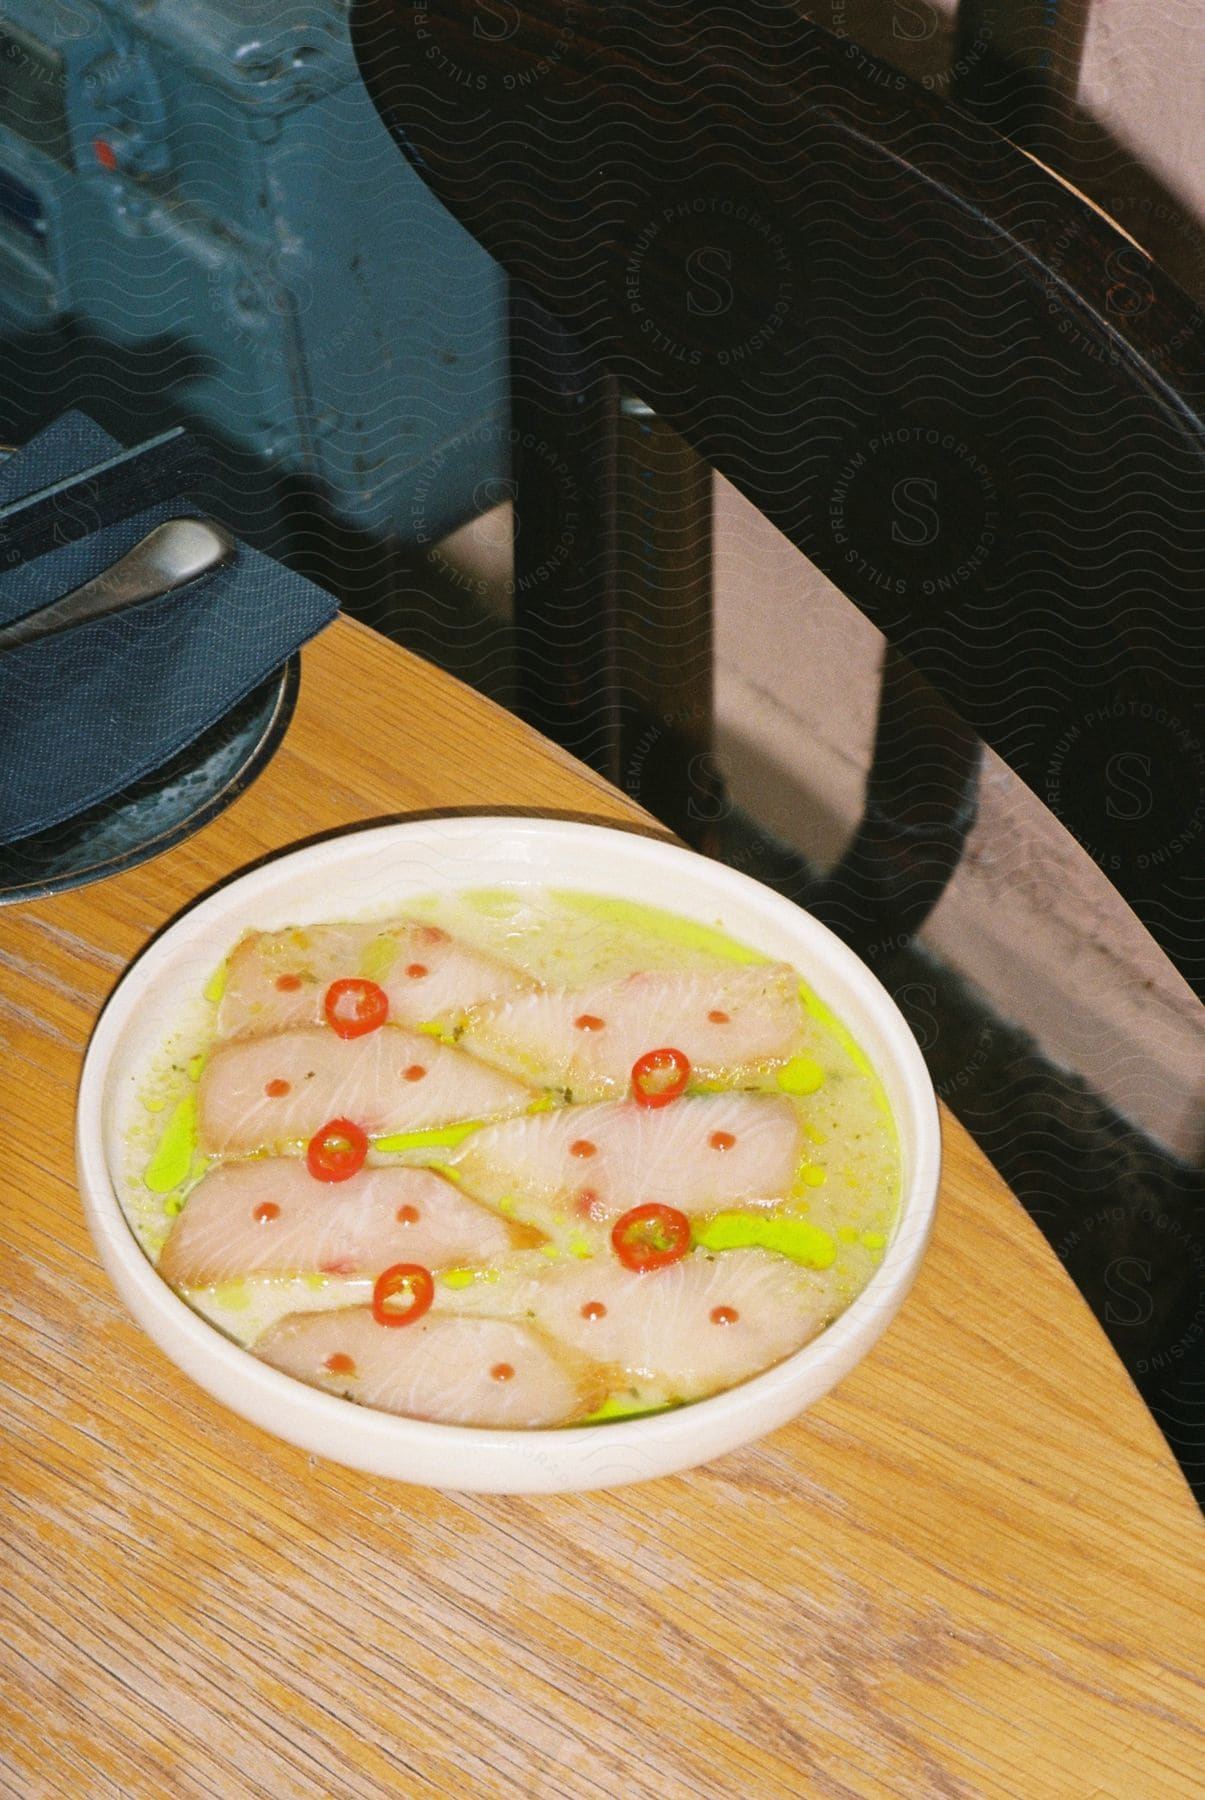 A bowl of food with slices of a light-colored ingredient topped with small red items and a green sauce and plate is on a wooden table